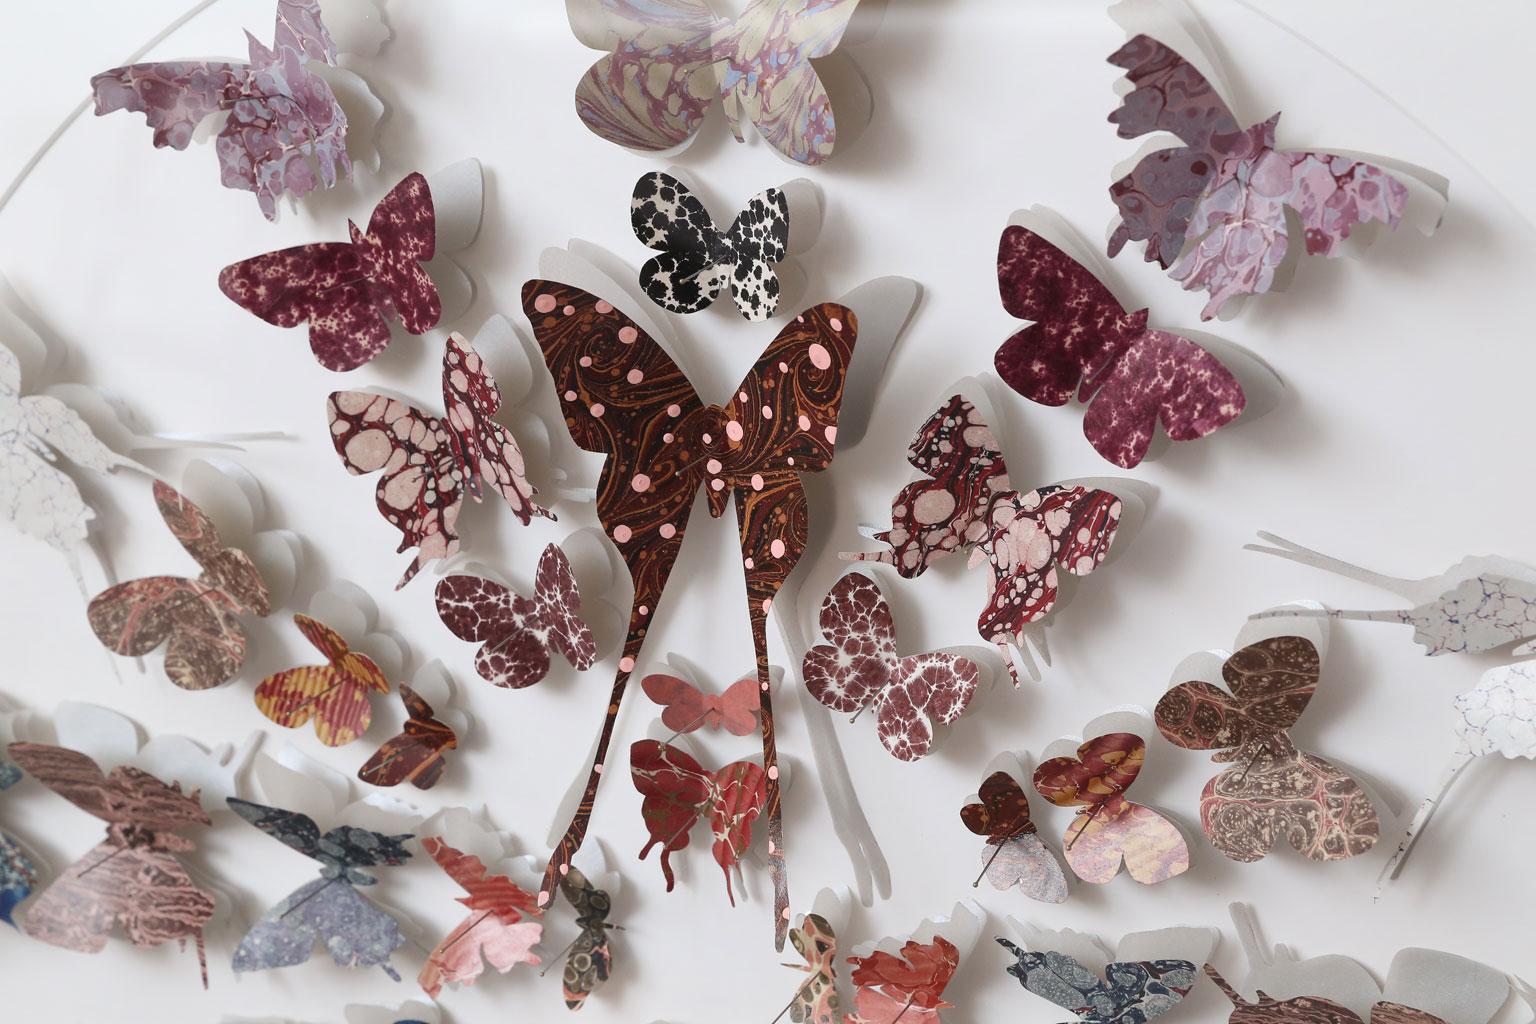 Marbleized paper butterfly box, marbleized end paper of various designs and colors, from antique books, cut into butterfly shapes and pinned as specimen within a large white-washed and silver leafed framed shadowbox.